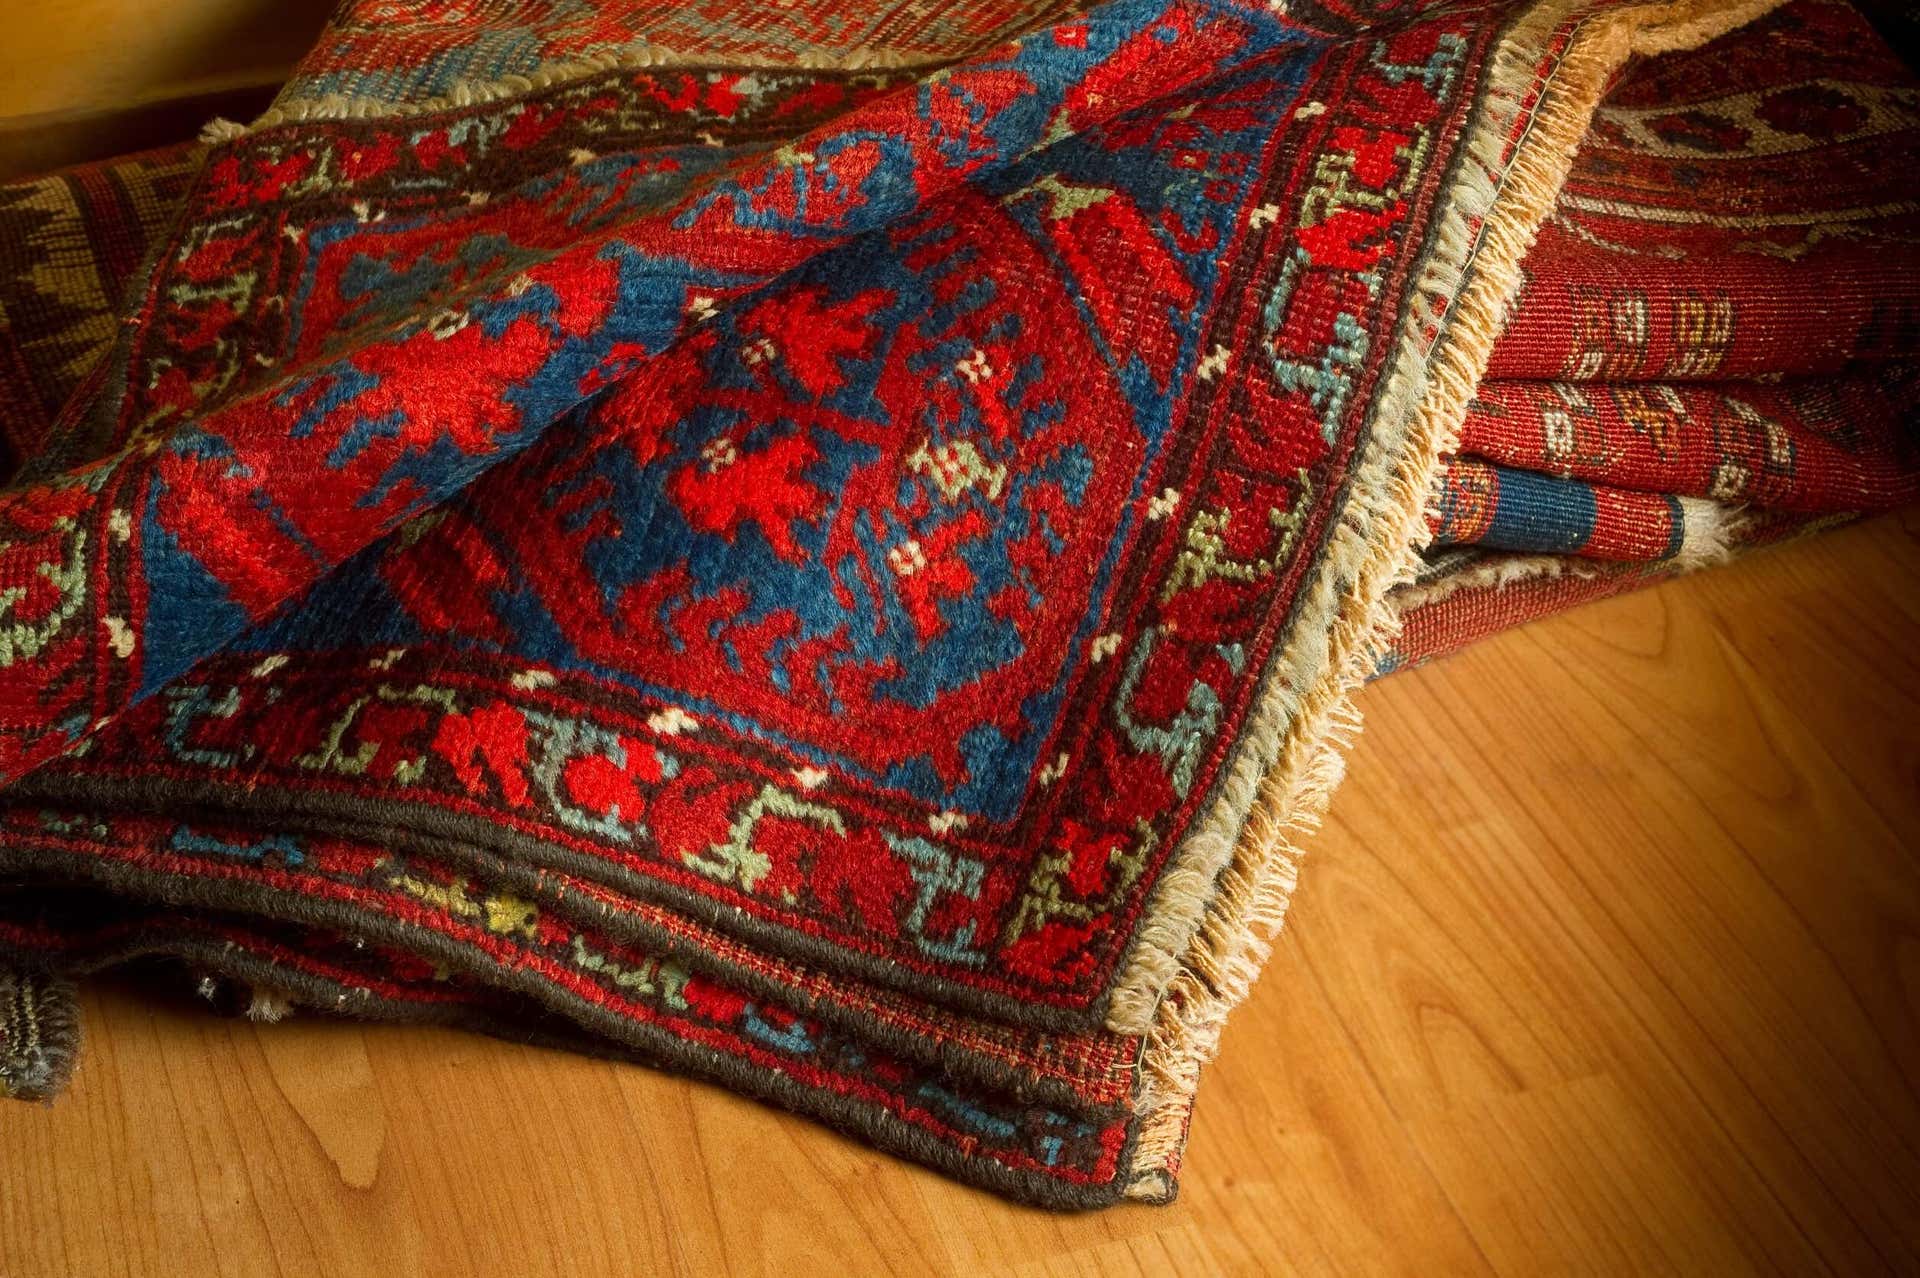 Carpets are great for ethnic style decor